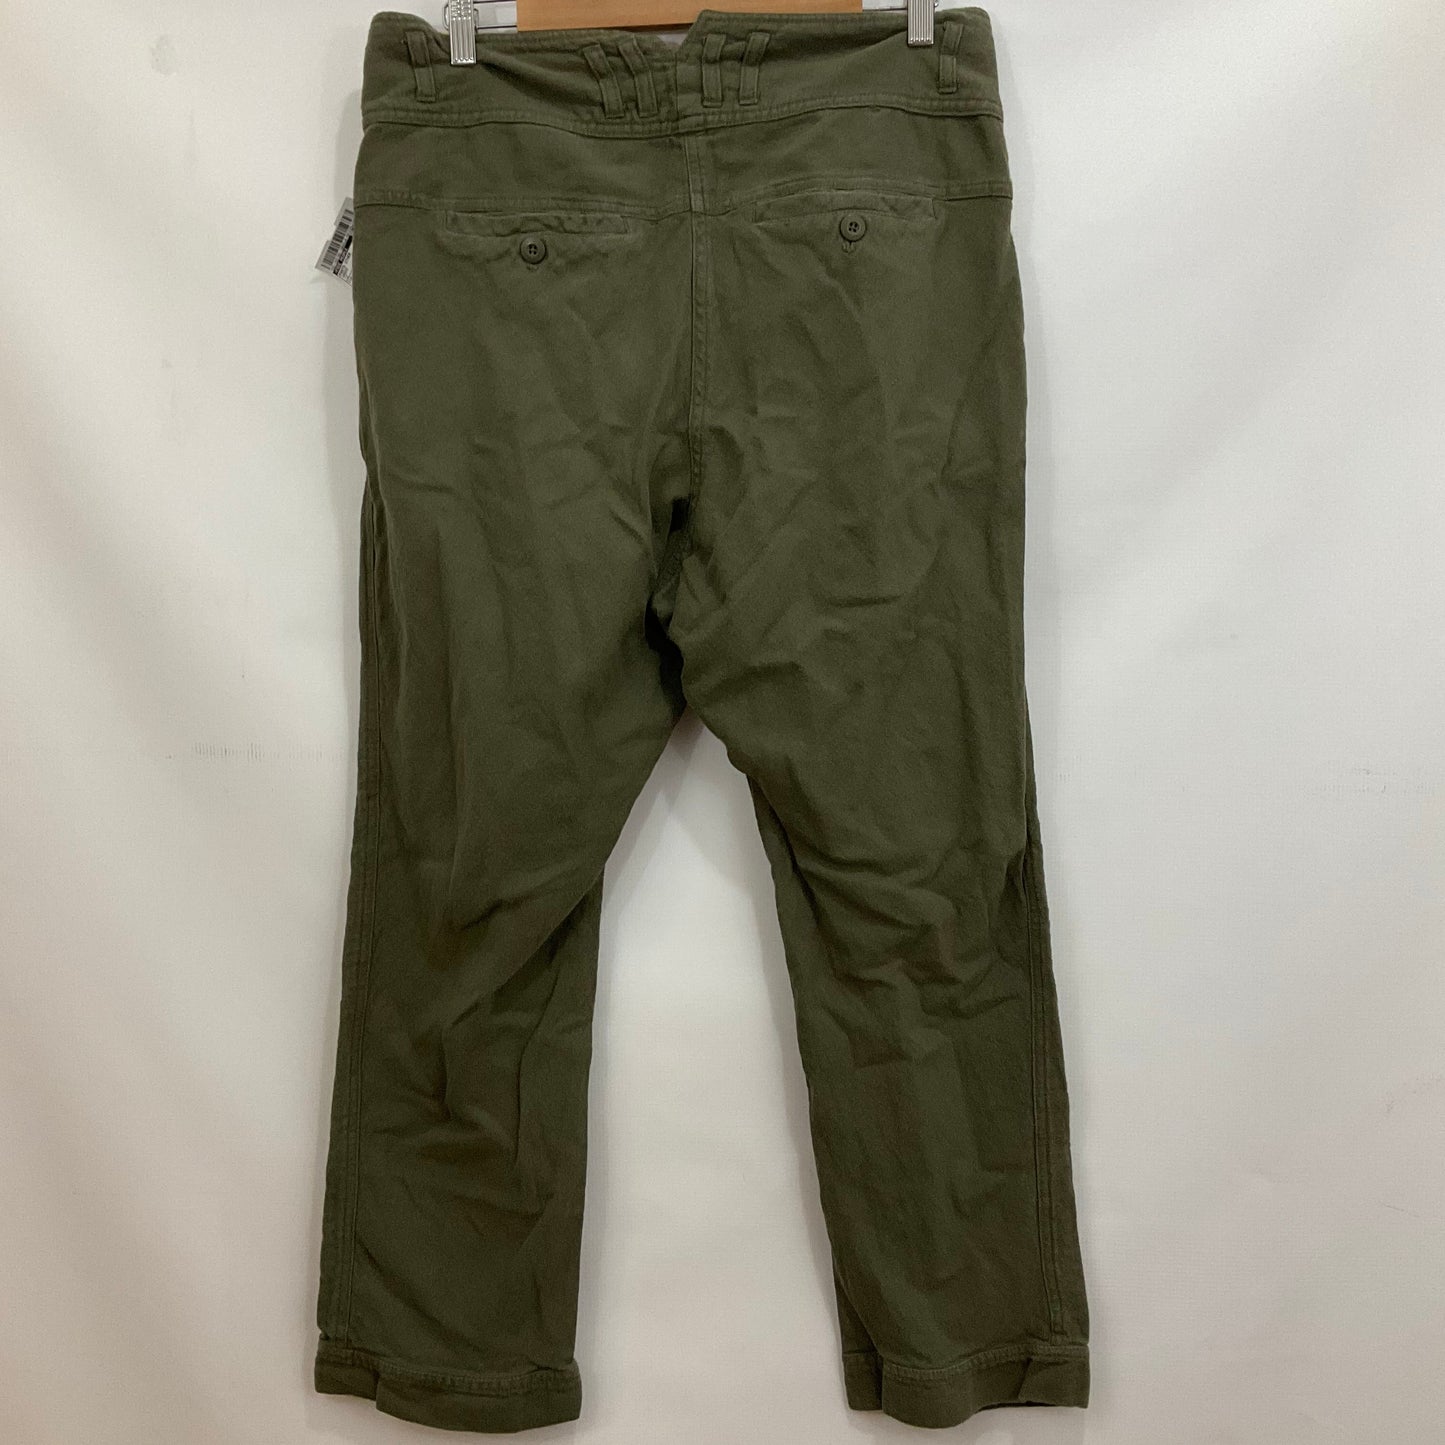 Green Pants Other Free People, Size 12